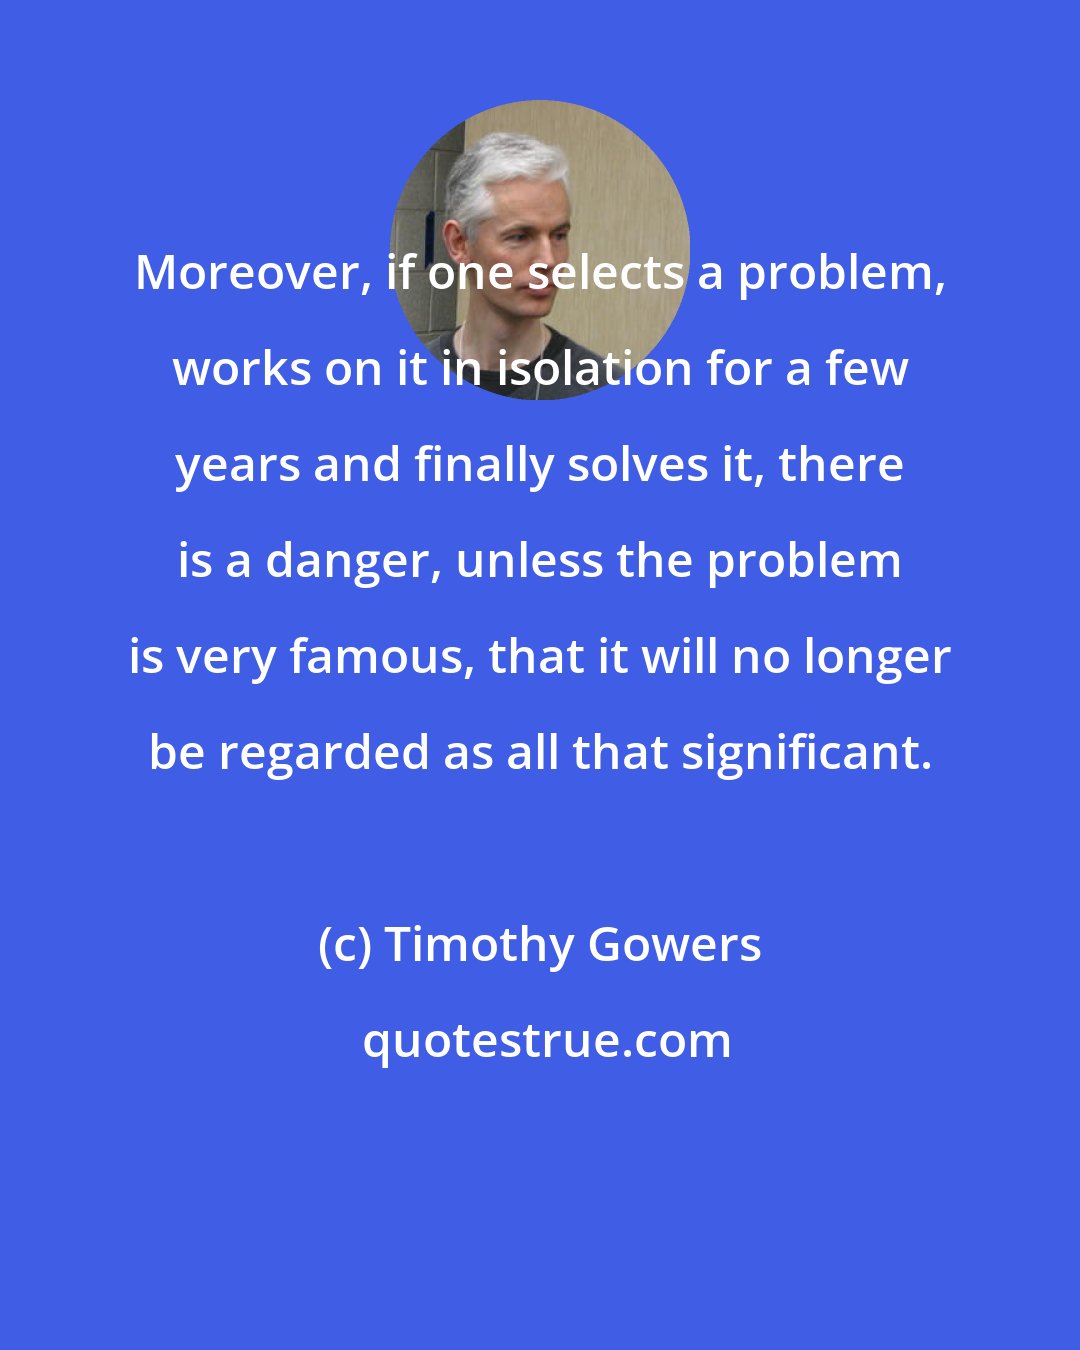 Timothy Gowers: Moreover, if one selects a problem, works on it in isolation for a few years and finally solves it, there is a danger, unless the problem is very famous, that it will no longer be regarded as all that significant.